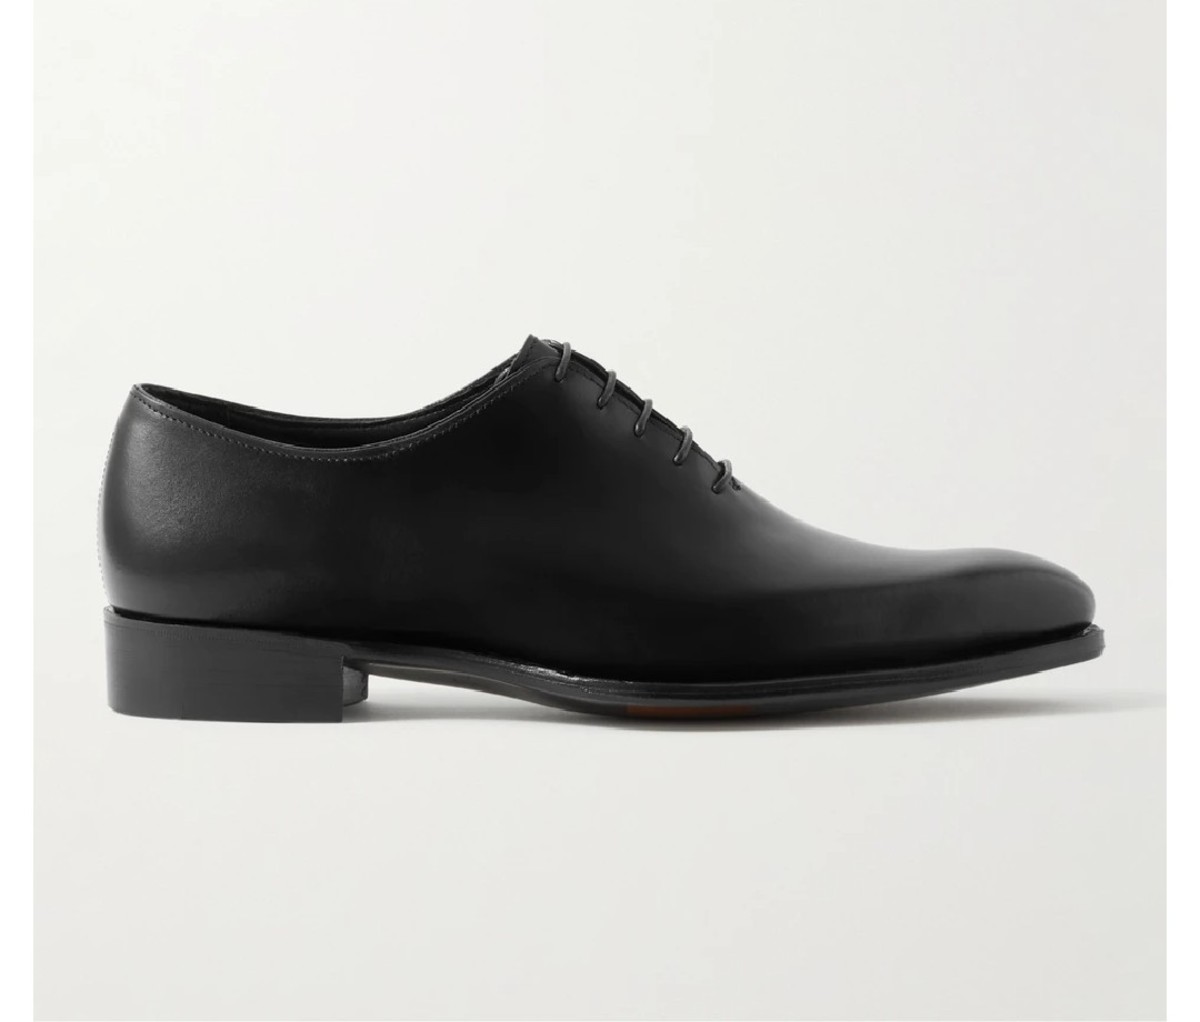 GEORGE CLEVERLEY Merlin Whole-Cut Leather Oxford